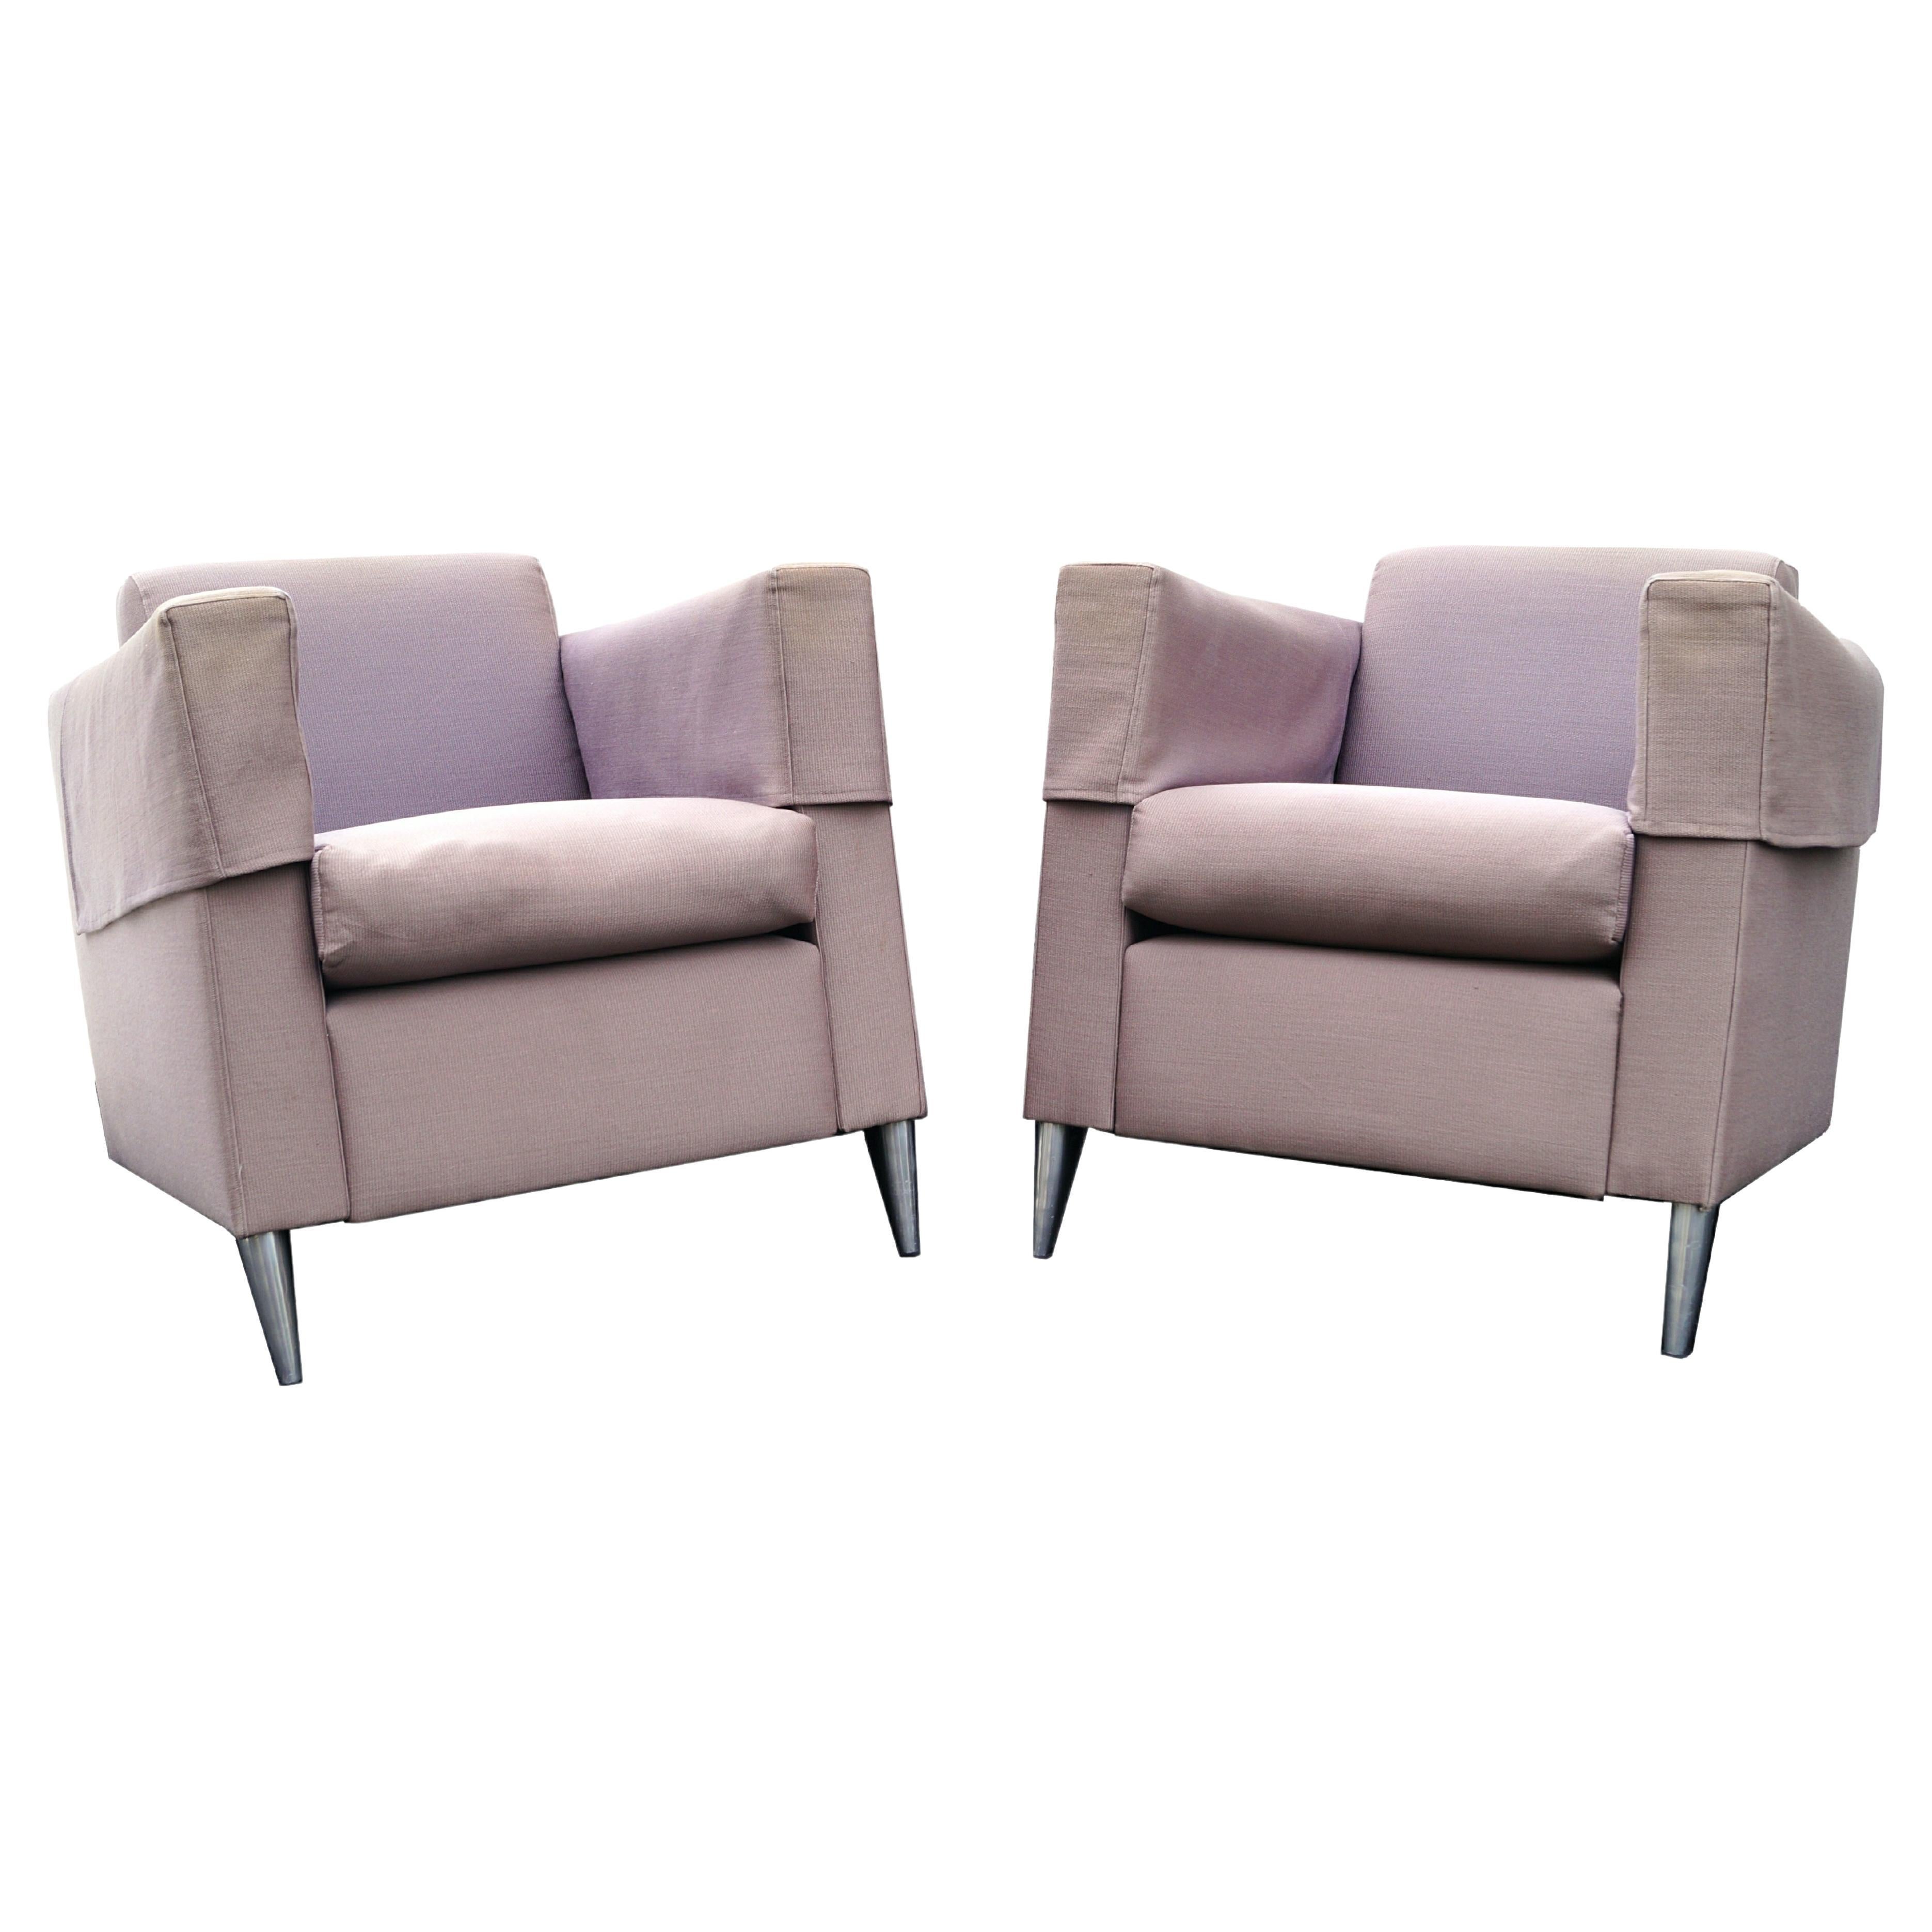 Pair of Len Niggelman lounge chairs by Philippe Starck.